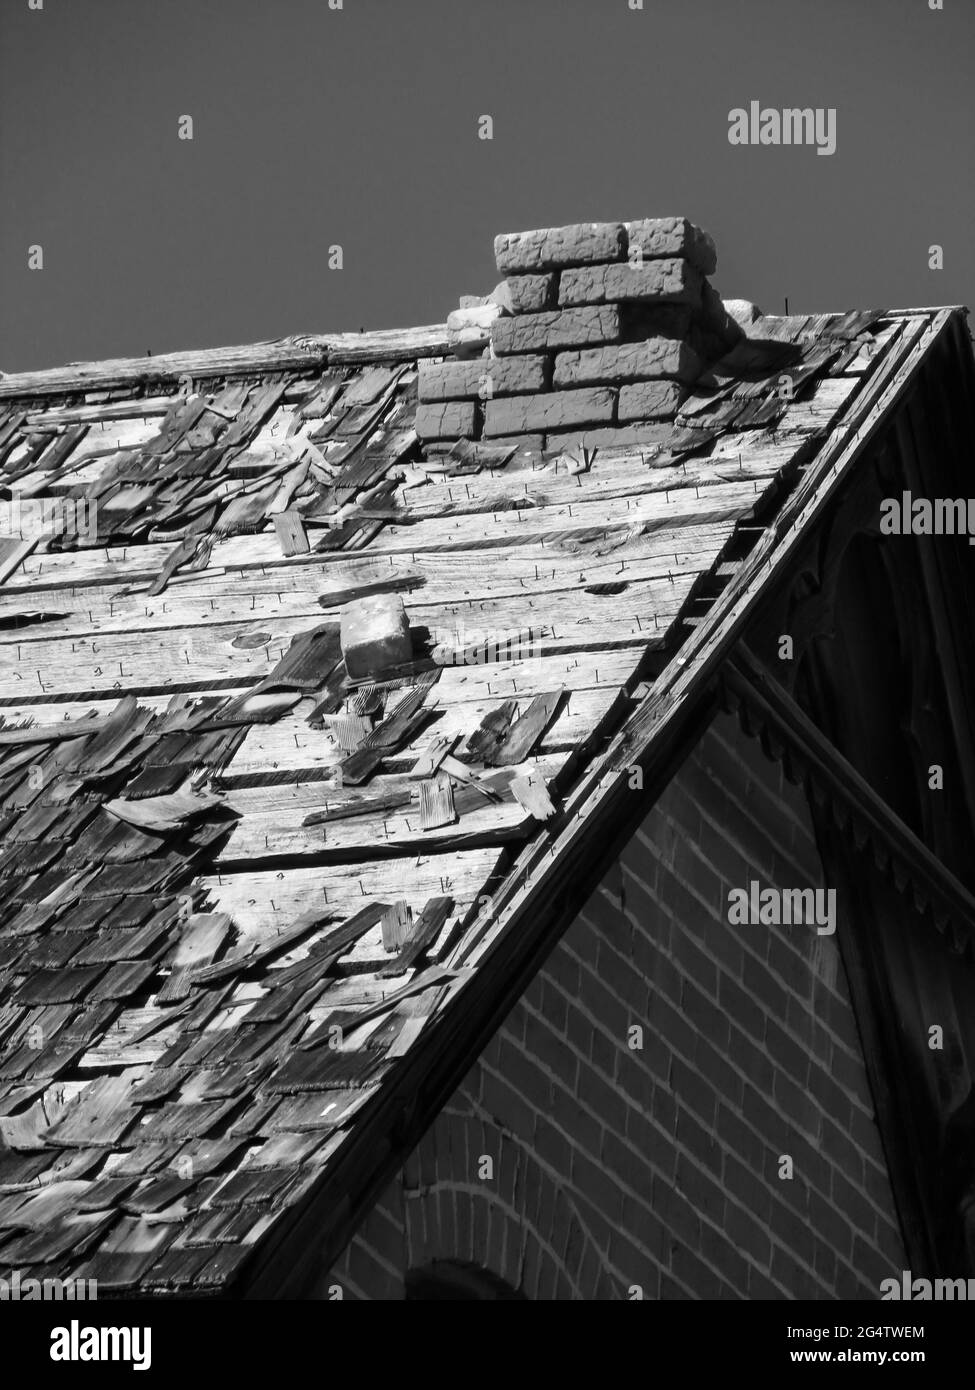 An old, dilapidated roof, photographed on a clear sunny day in the small town of Escalante, Utah, USA in black and white Stock Photo